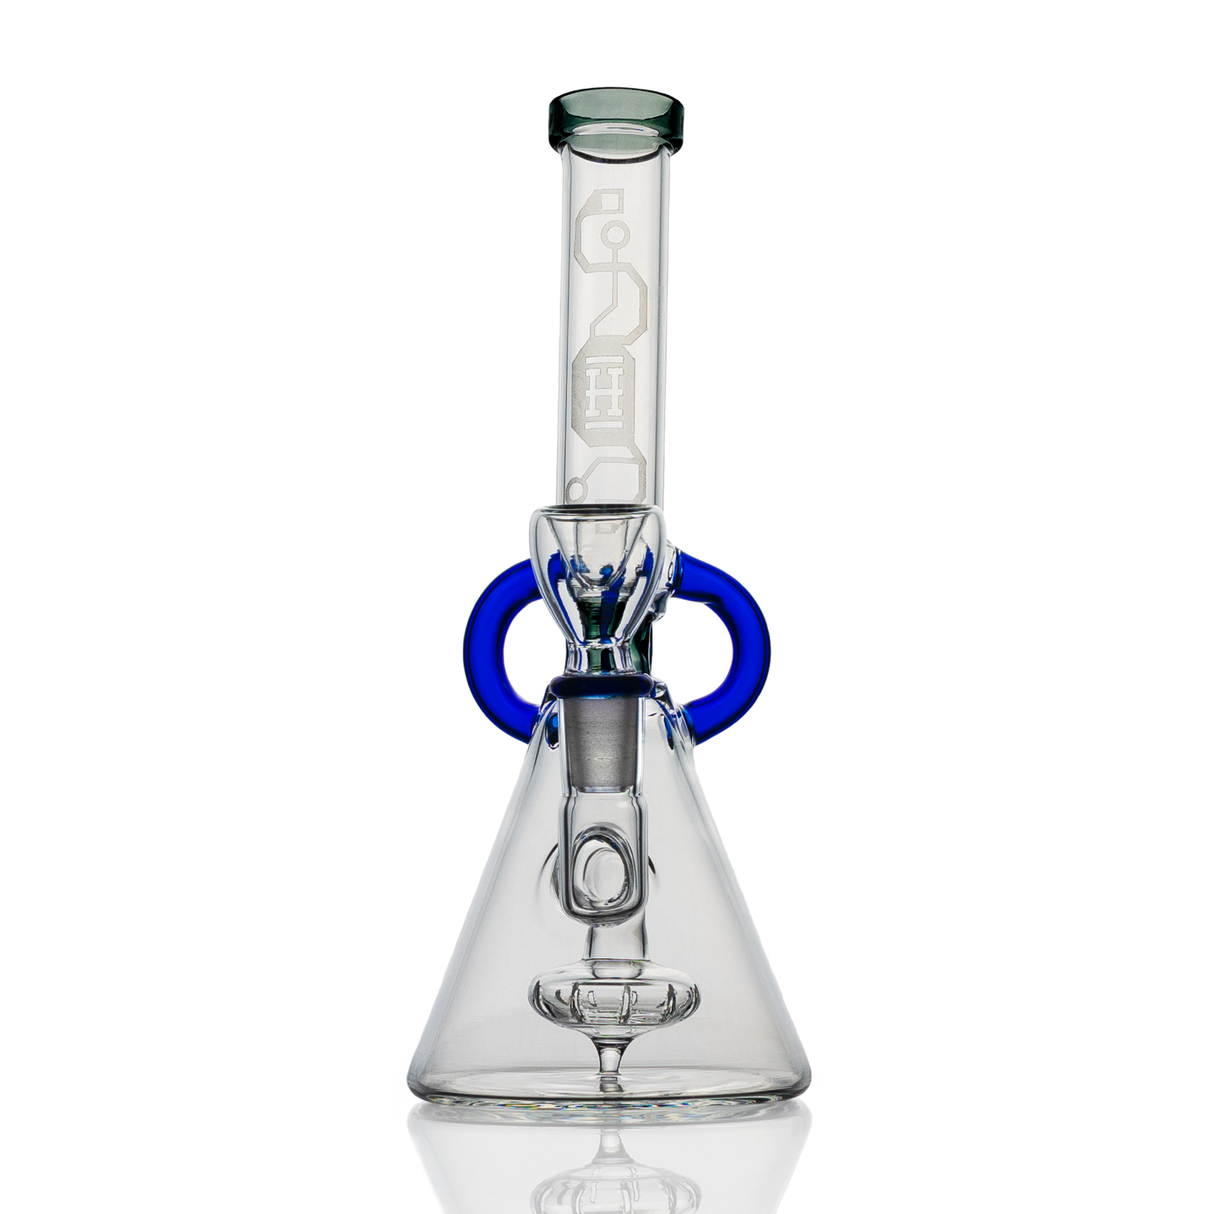 Hemper Cyberpunk Bong with Showerhead/UFO Percolator, 7" Height, Front View on White Background